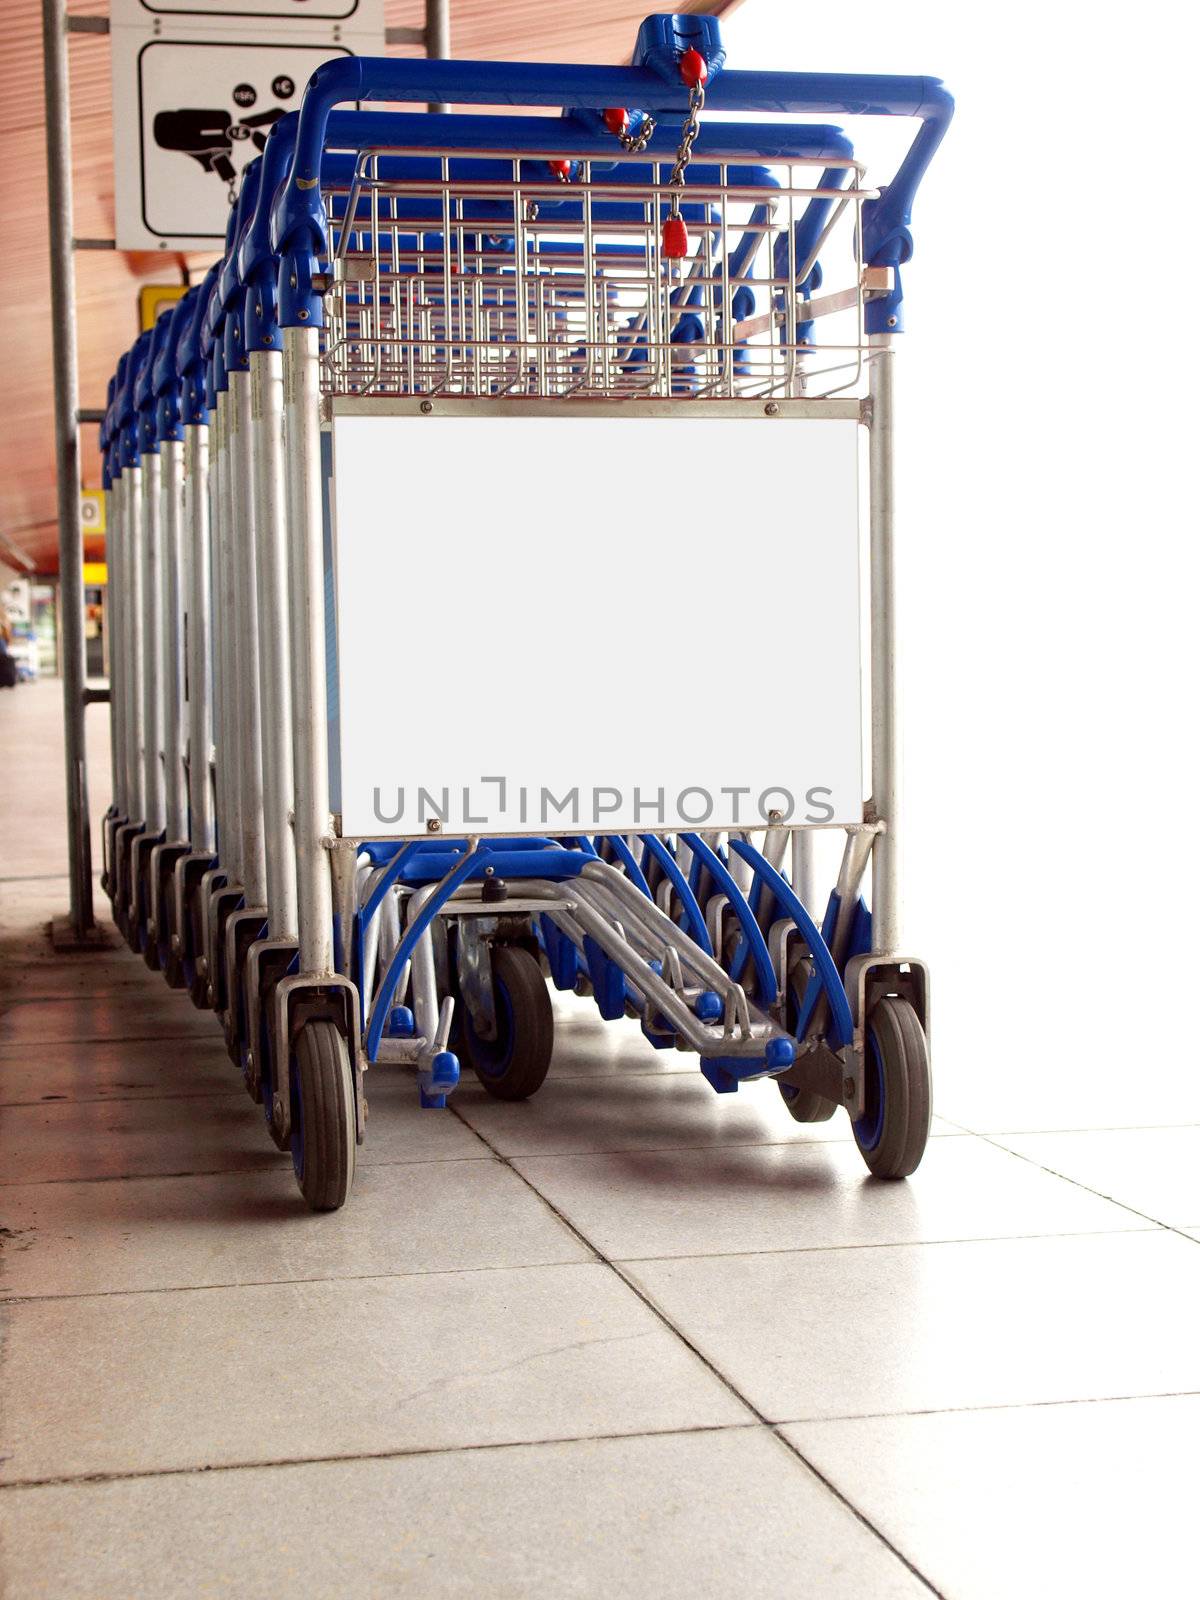 Trolley for luggage or baggage transportation at airports